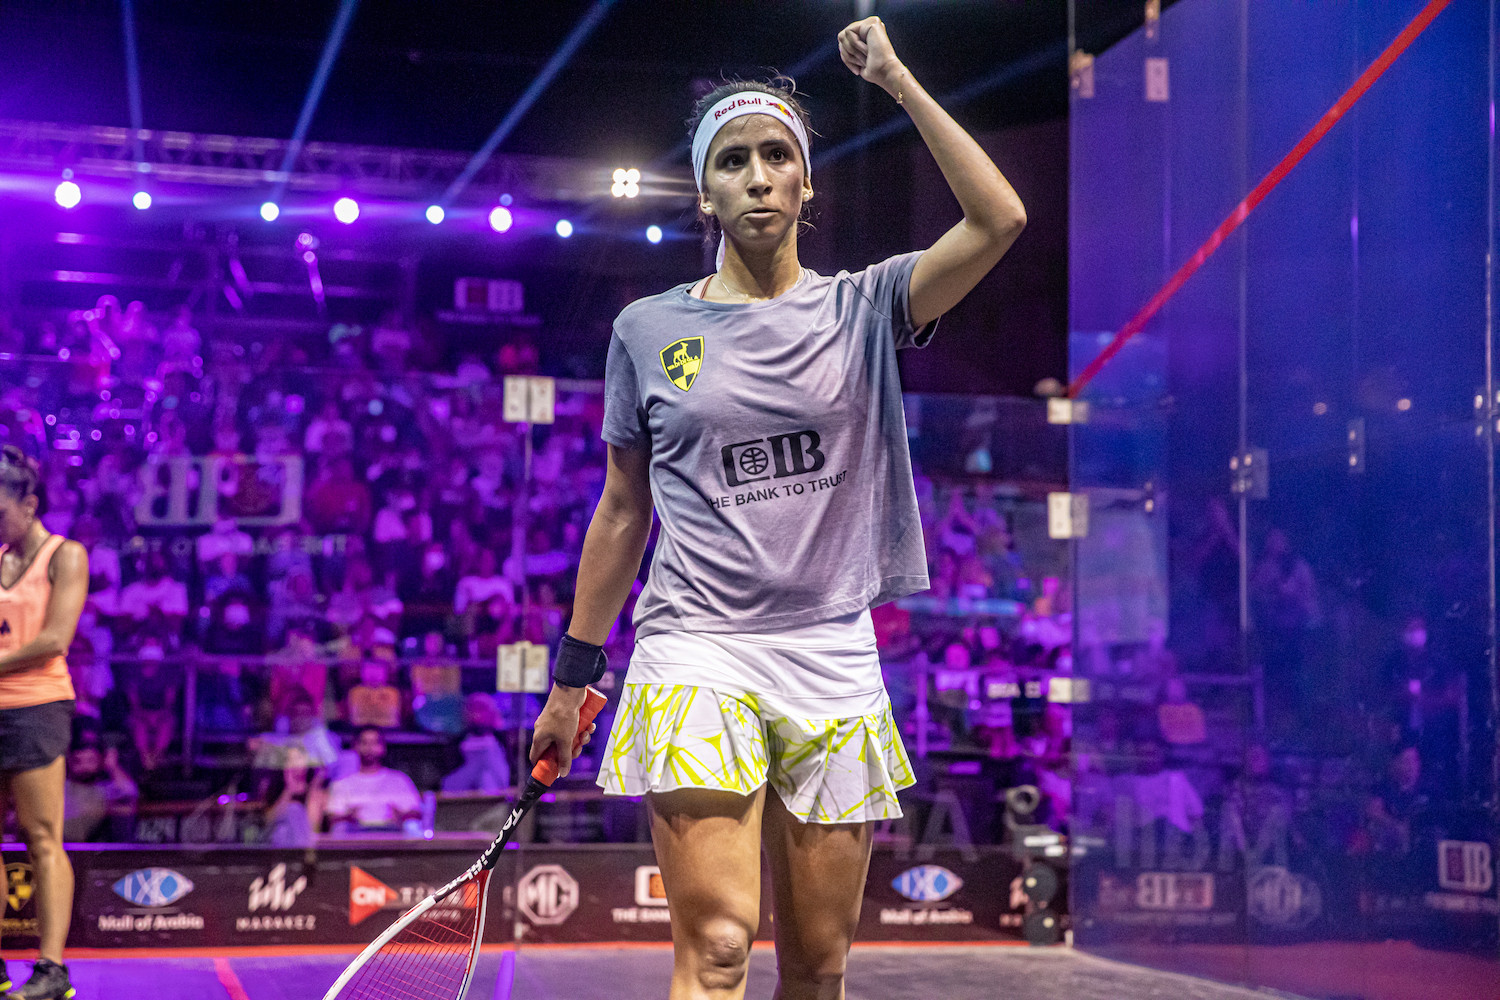 Nouran Gohar became the first player to qualify for the semi-finals of the PSA World Tour Finals in Cairo ©Getty Images